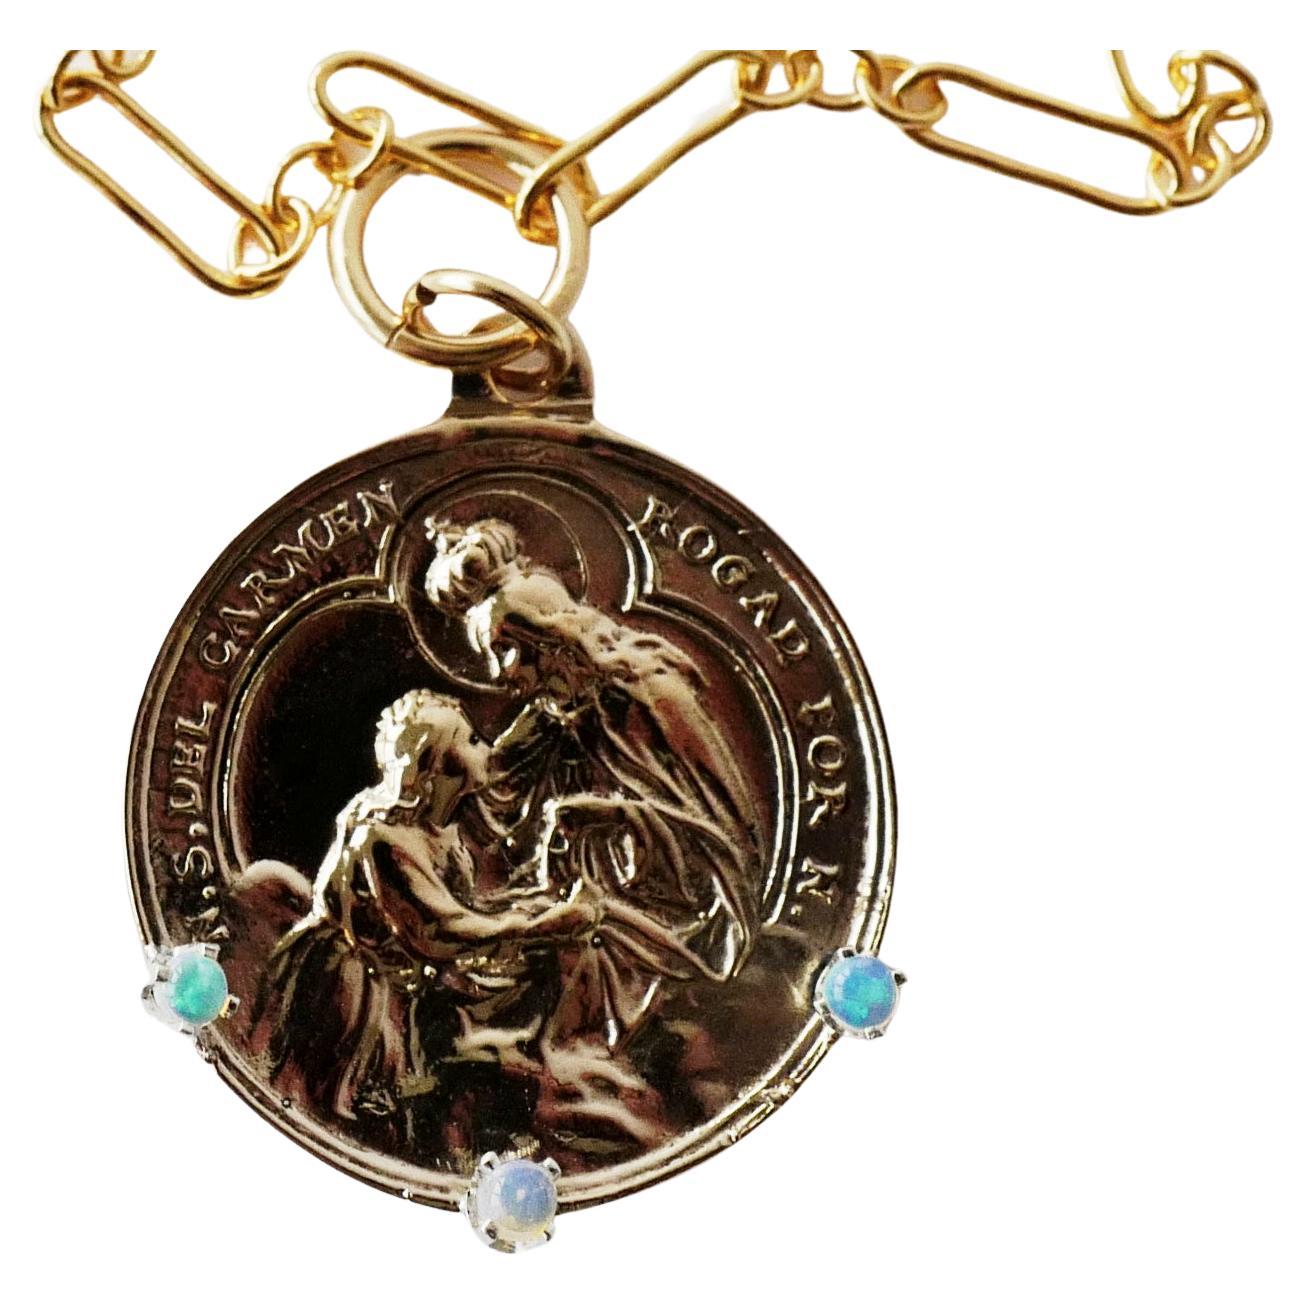 Virgin Mary Medal Chain Necklace Opal Pendant J Dauphin For Sale